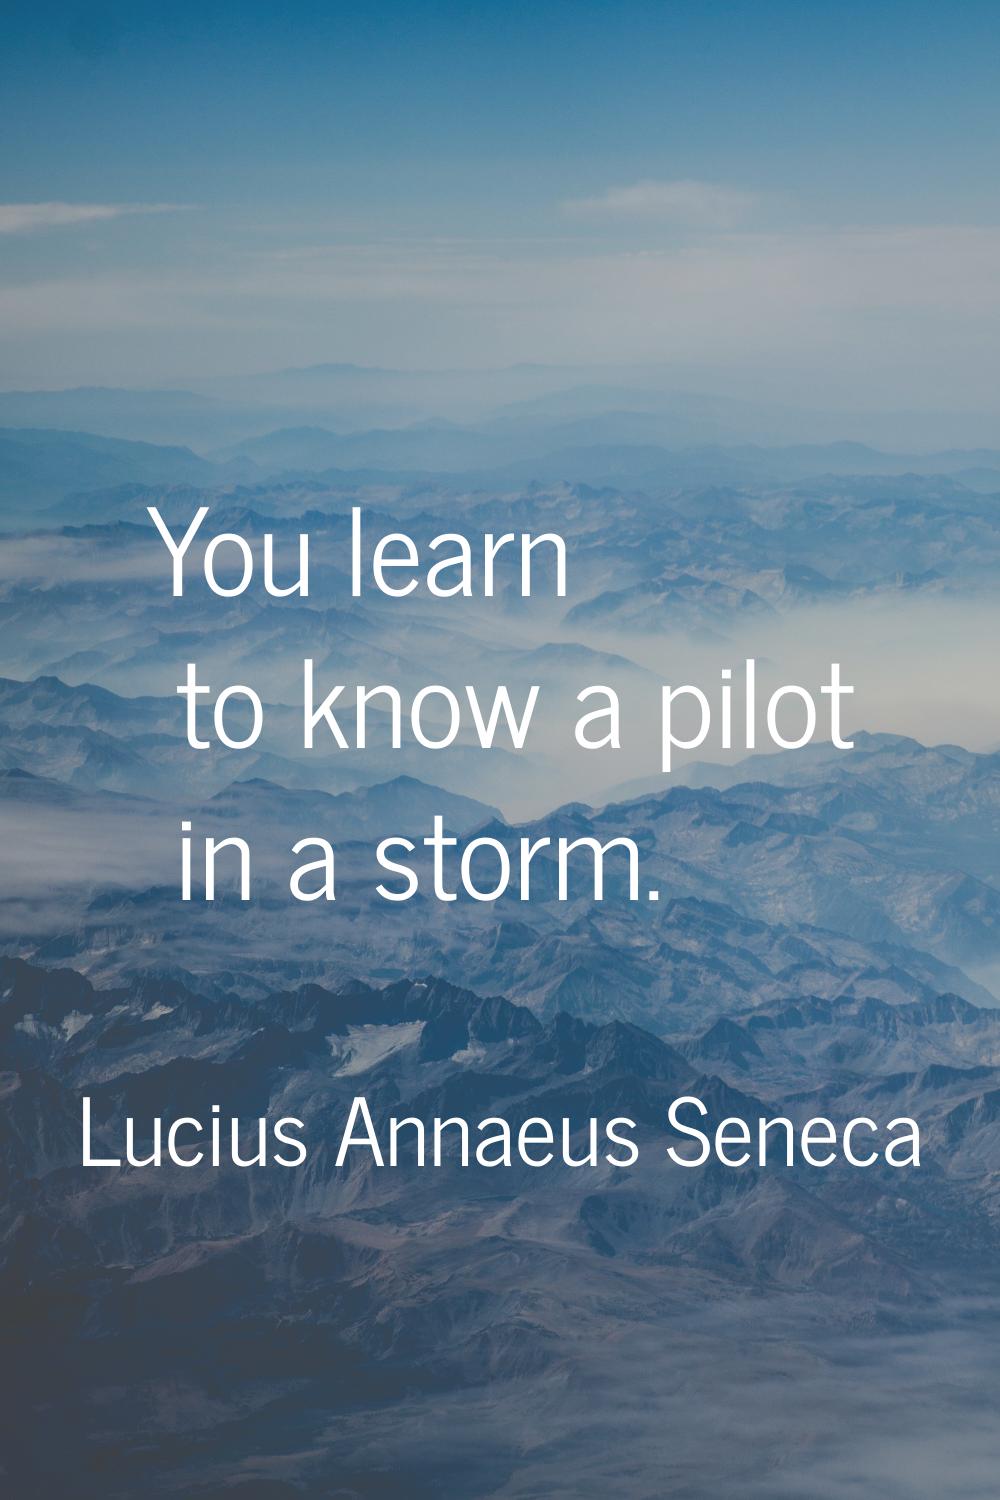 You learn to know a pilot in a storm.